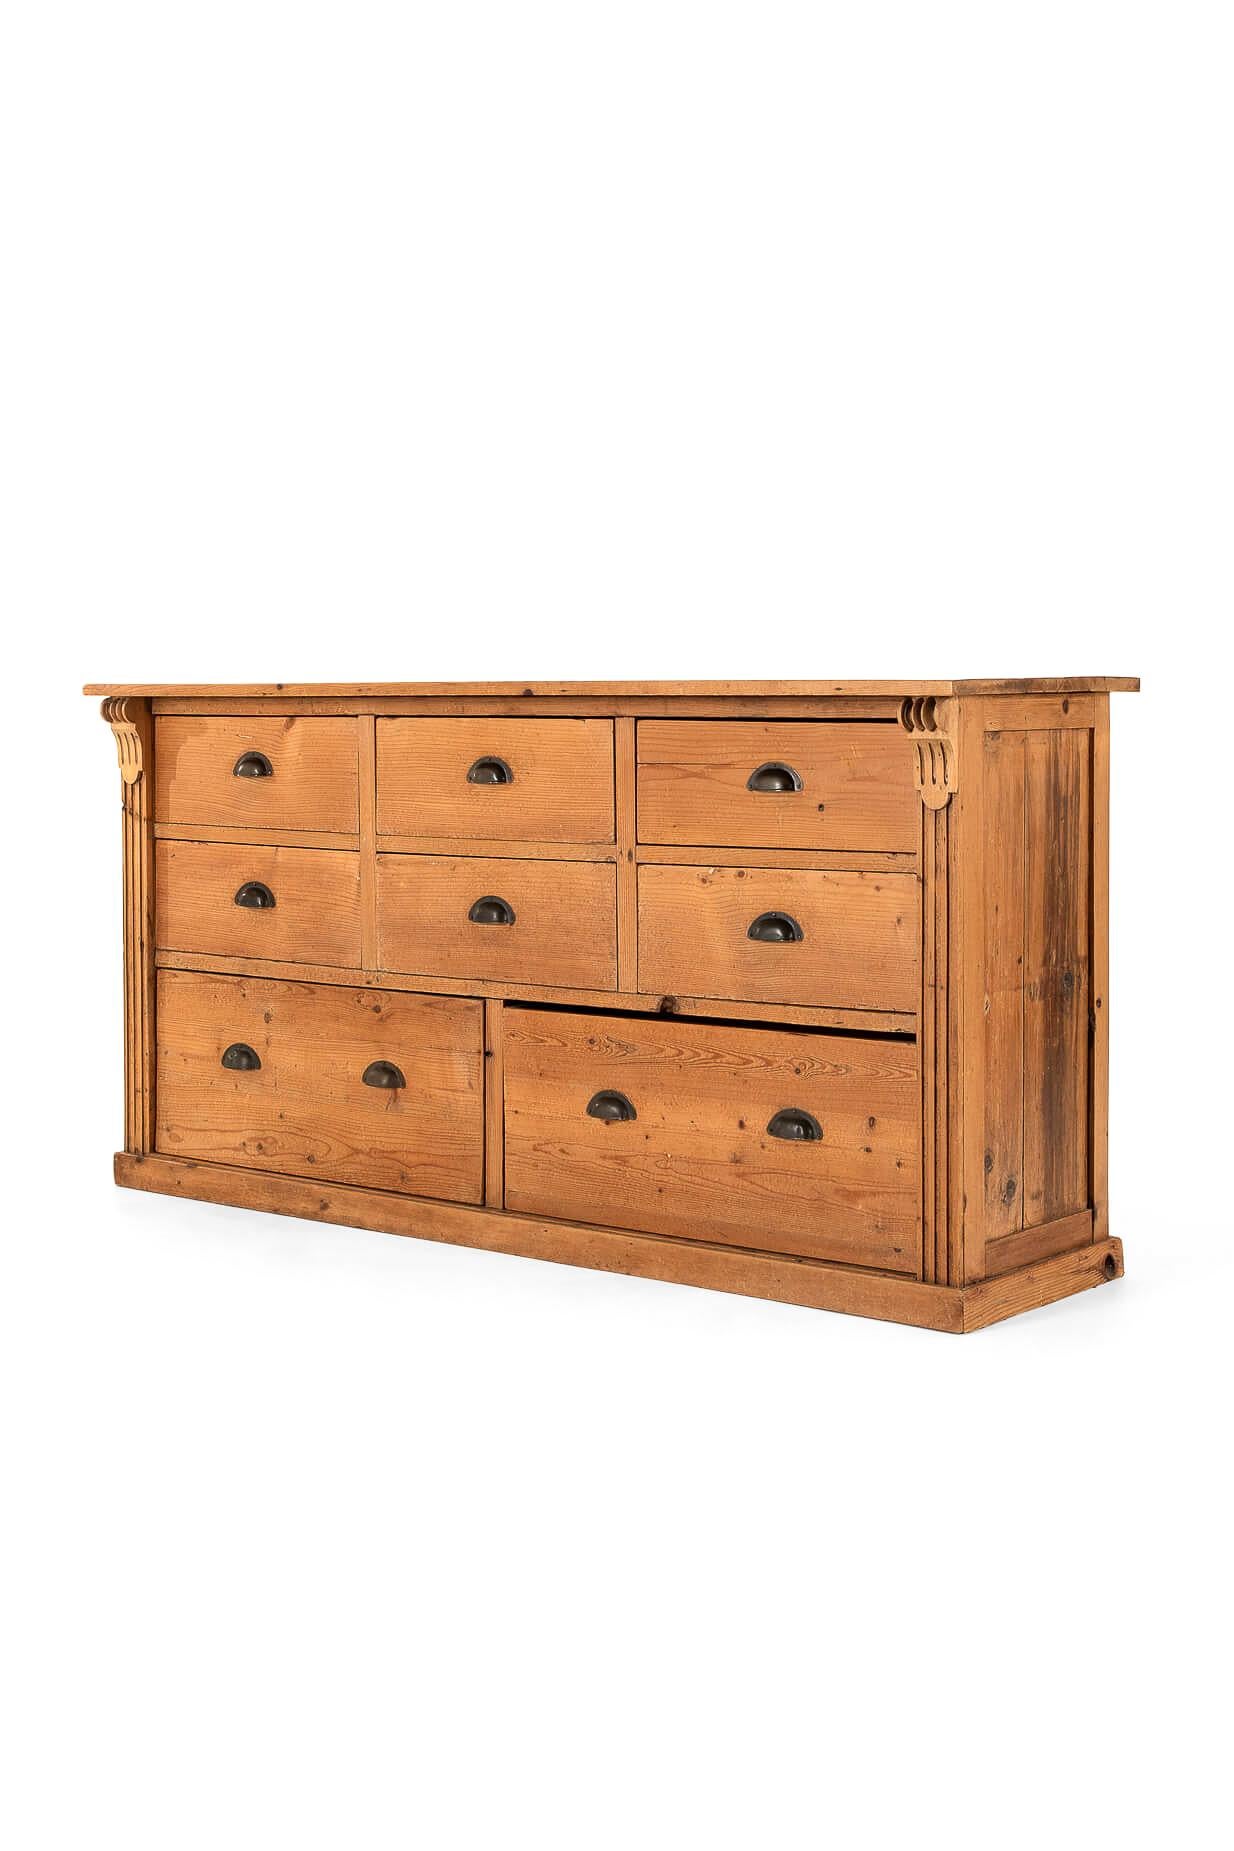 A superb pitch pine shop counter from a tobacconist shop with a substantial plank top.

Each end is flanked by decorative carved corbels, fluted parallel columns and raised on a plinth base.

Six large smooth-running drawers over two larger frieze